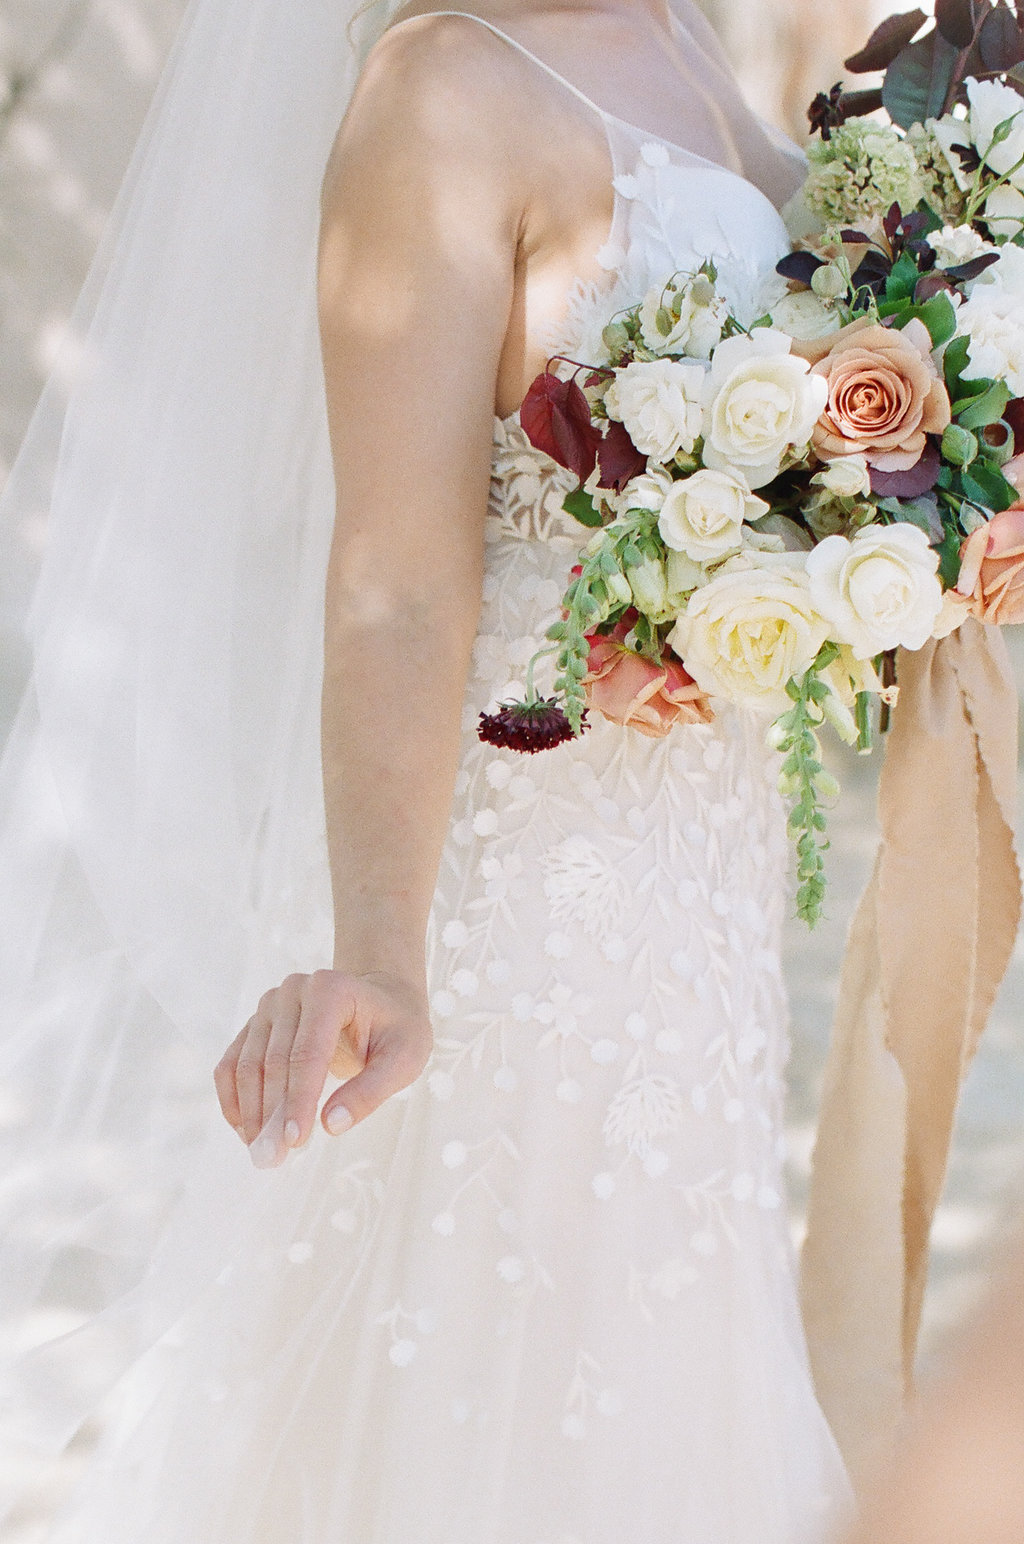 Check Out This California Wedding Dress and Bouquet